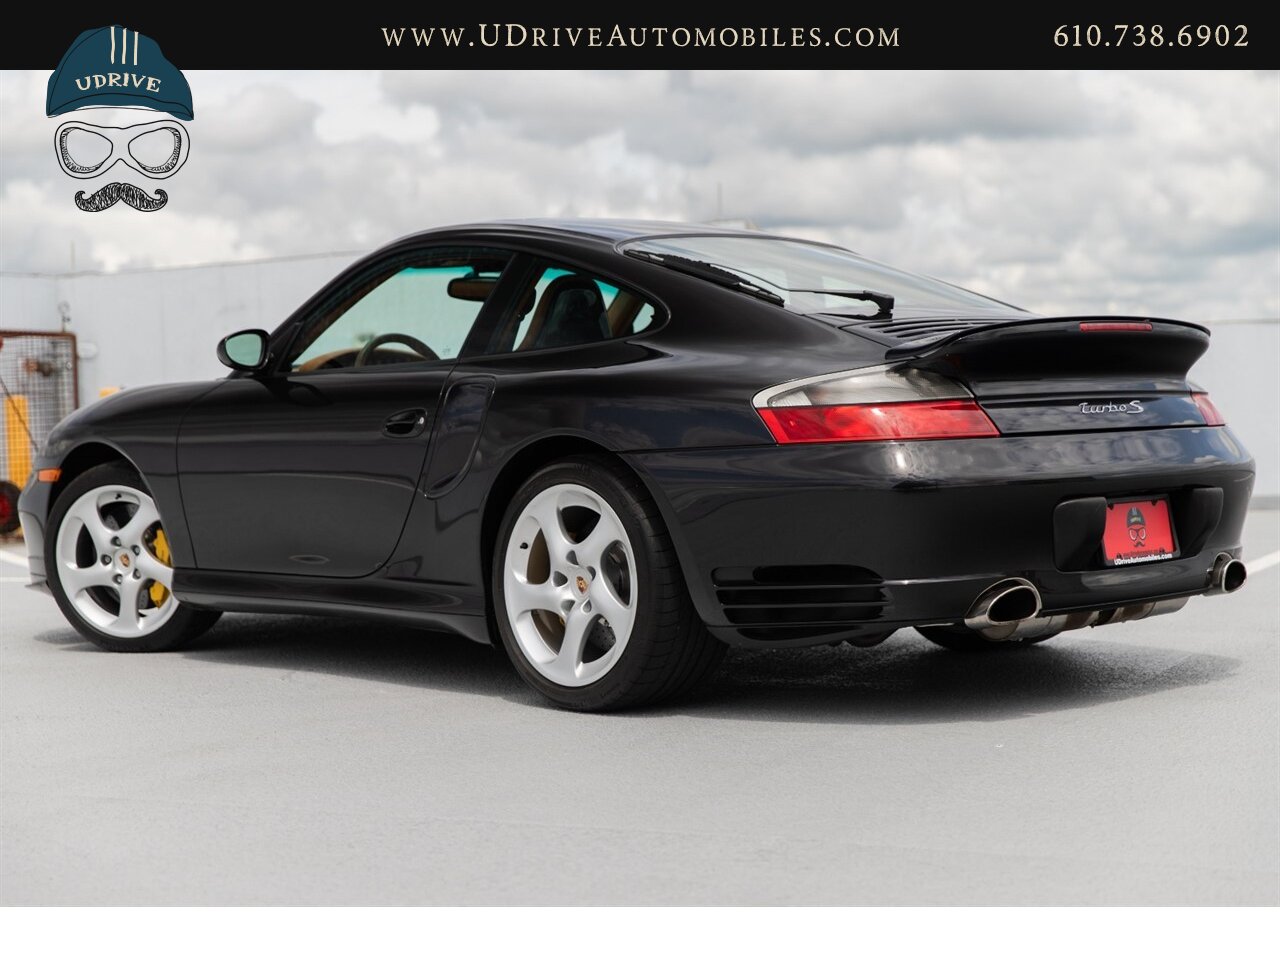 2005 Porsche 911 Turbo S 6 Speed 14k Miles Sport Sts Painted Backs  Natural Brown Lthr $144,070 MSRP - Photo 5 - West Chester, PA 19382